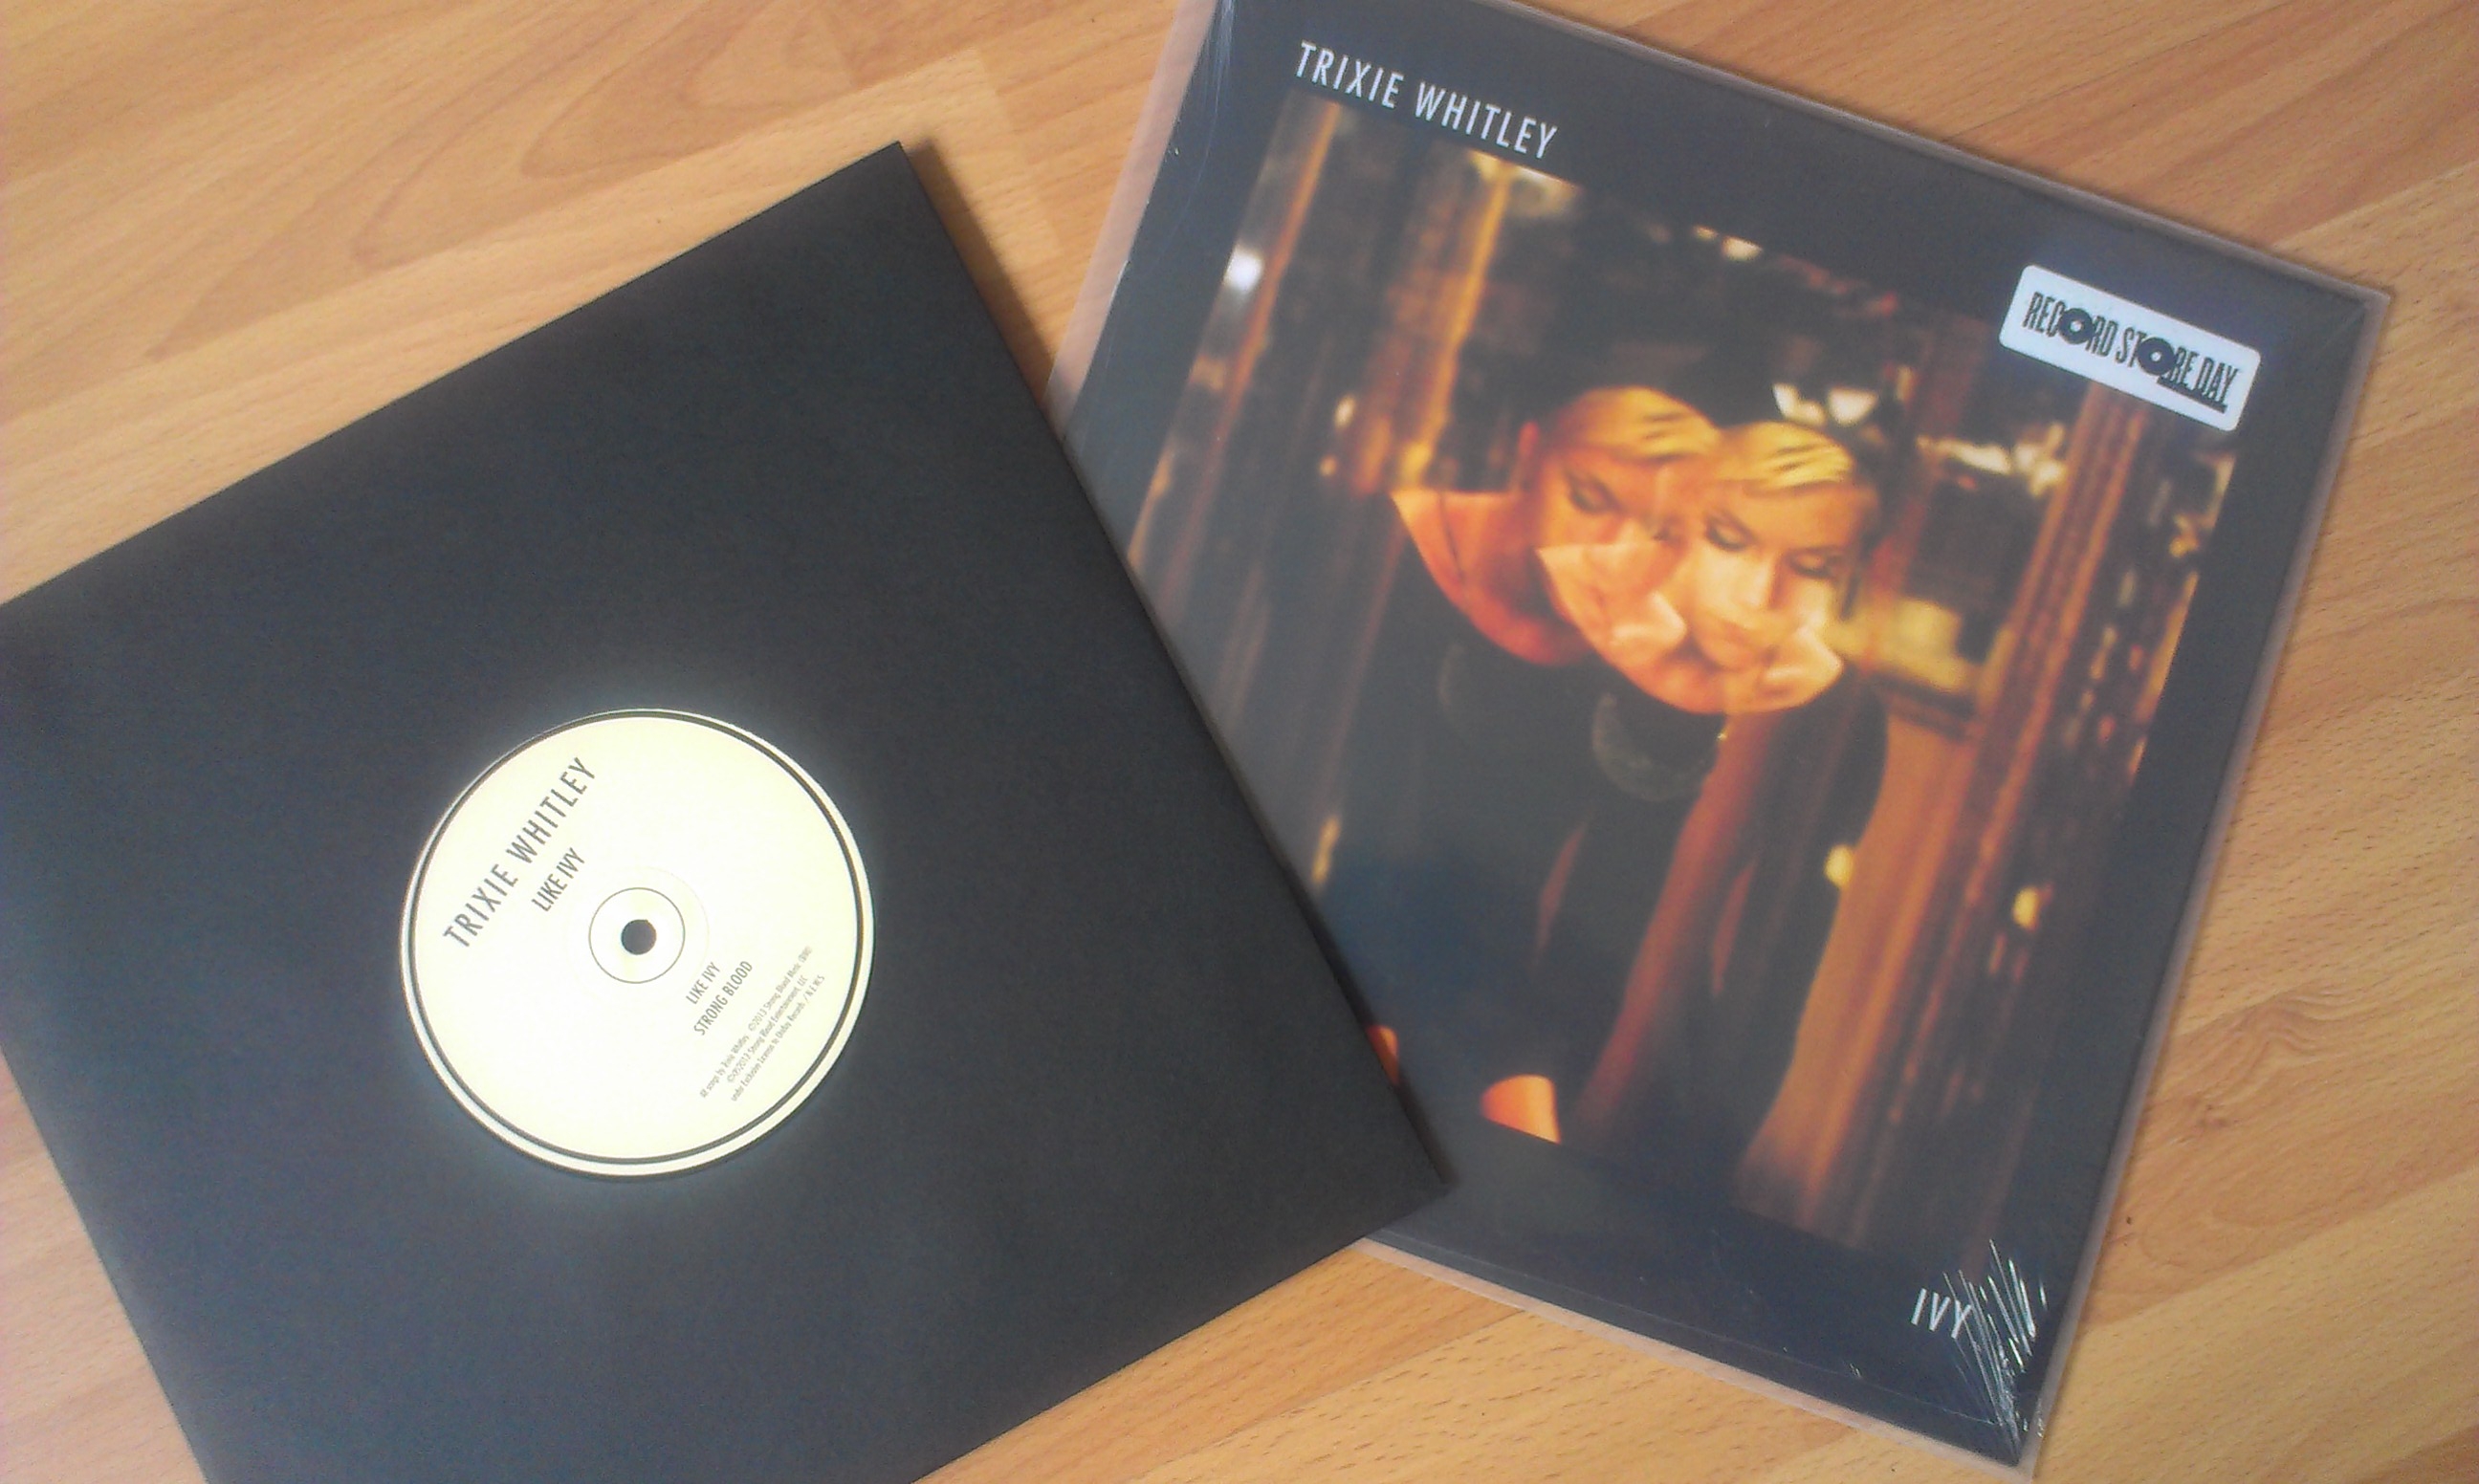 Trixie Whitley Like Ivy RSD 2013 Limited Edition